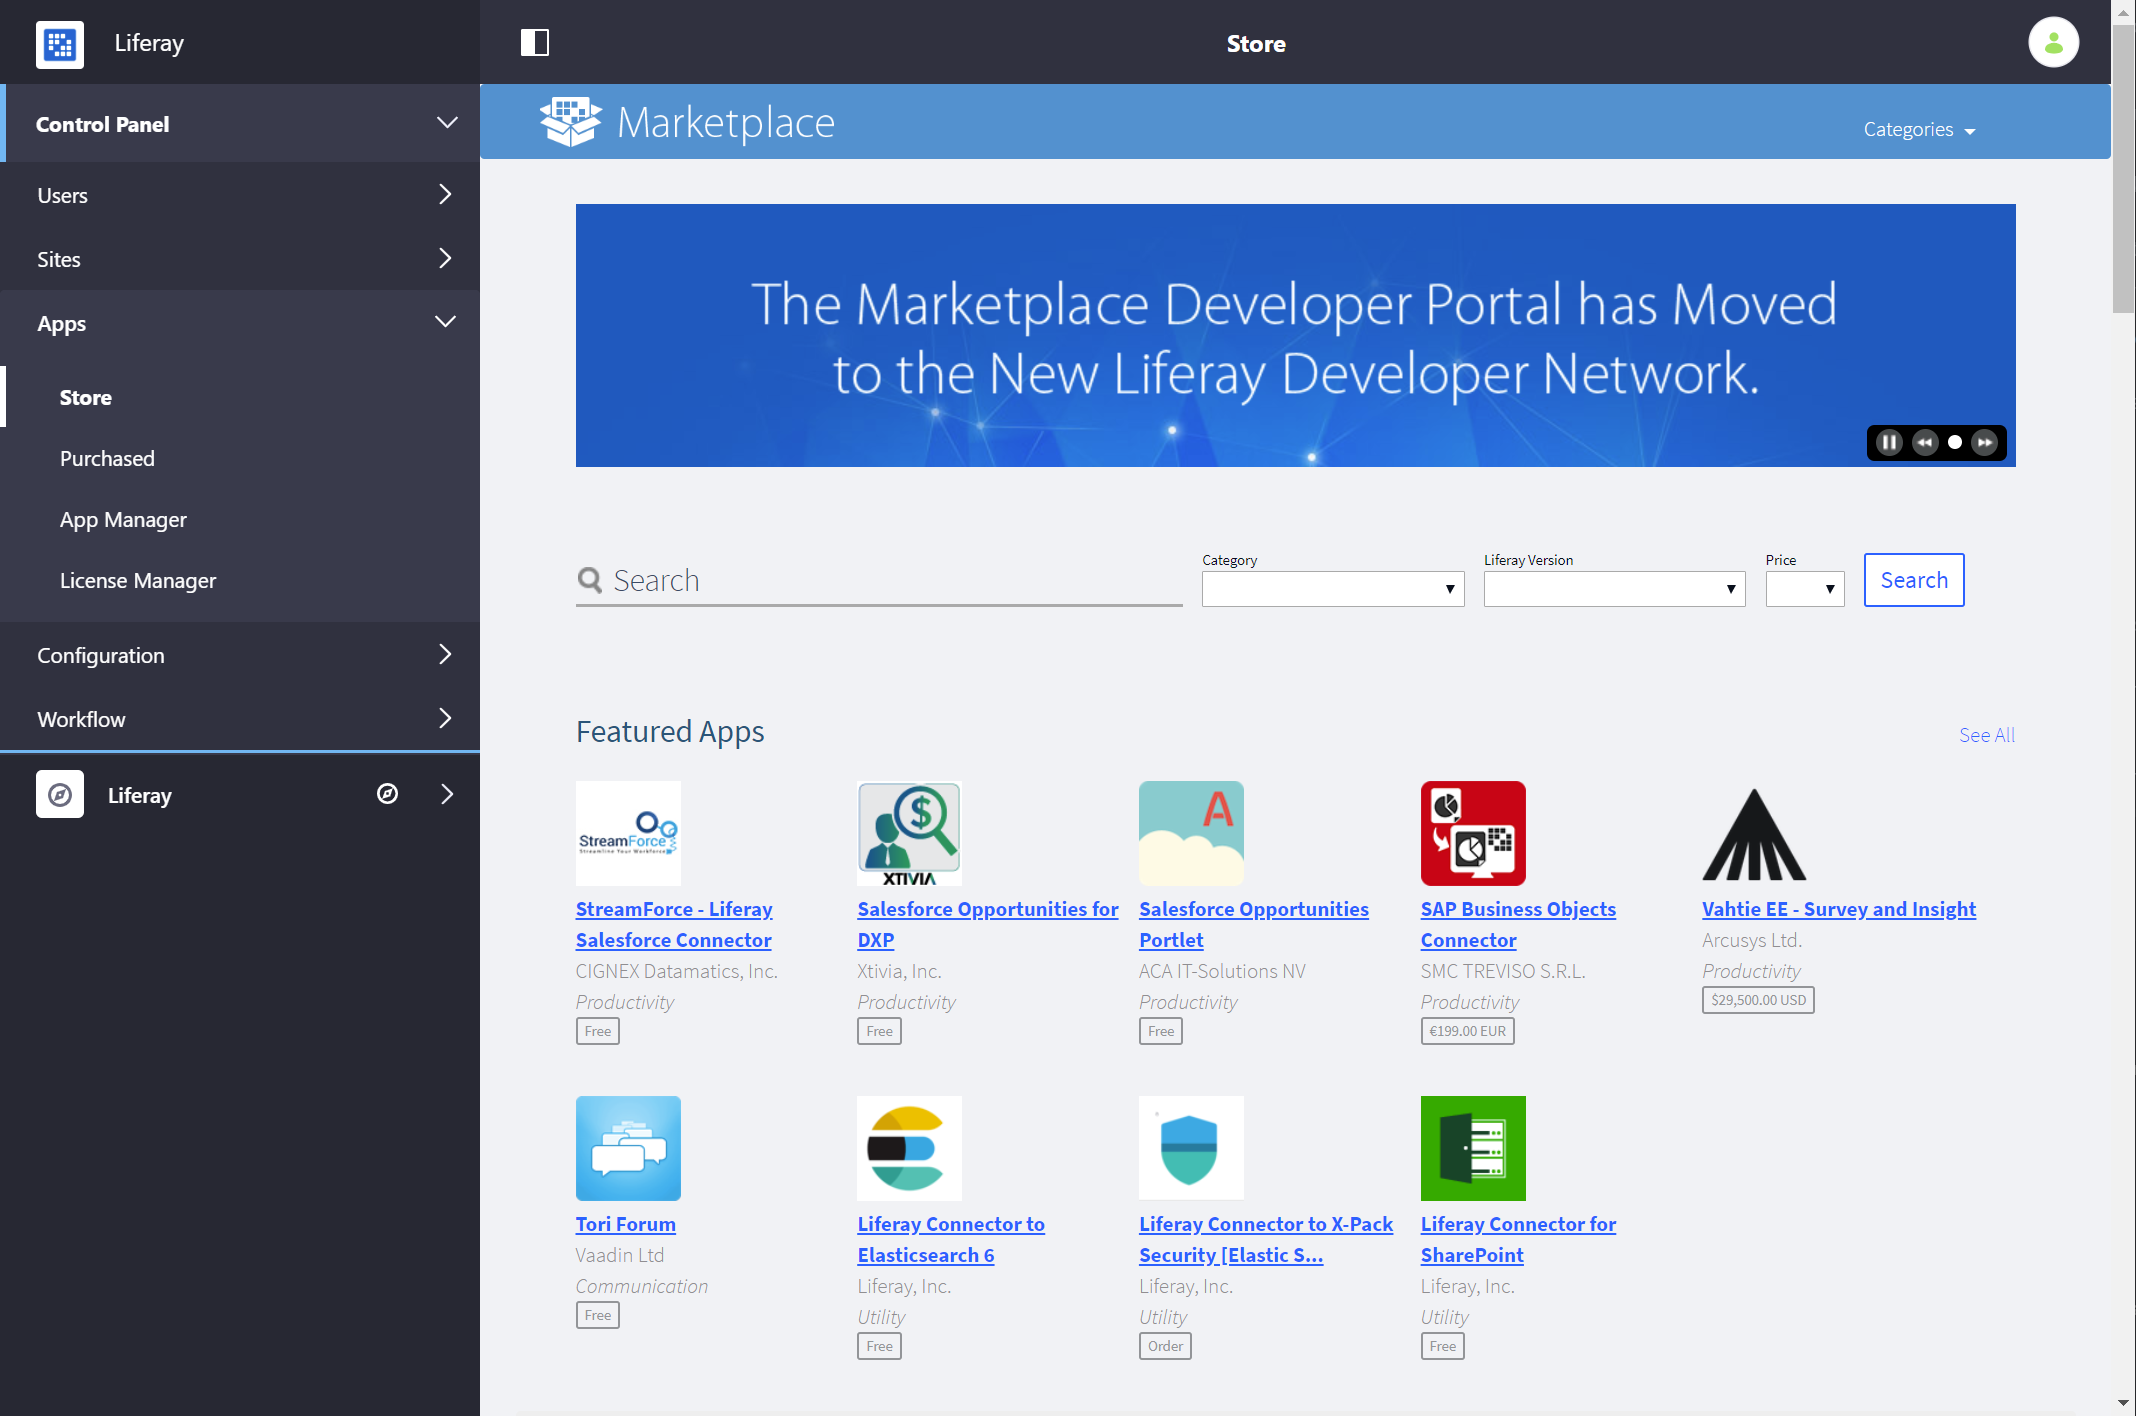 The Liferay Marketplace home page highlights new apps, lists apps by categories, and has search.